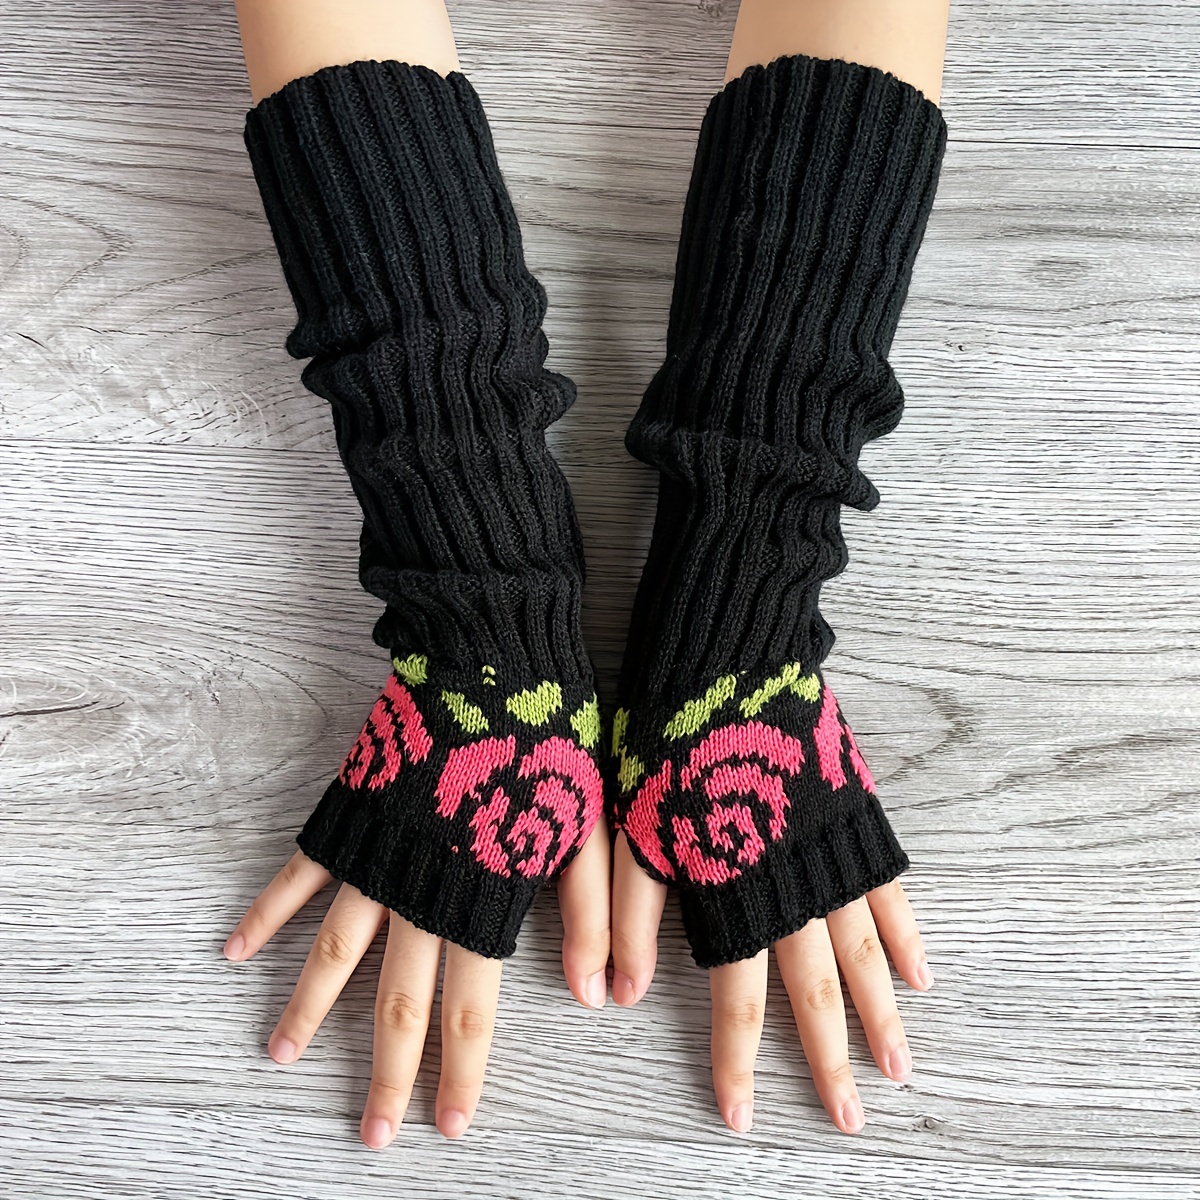 Vintage Fingerless Gloves For Women Butterfly Flowers Embroidery Knitting  Half Finger Gloves Autumn Winter Thumb Hole Arm Warmers 